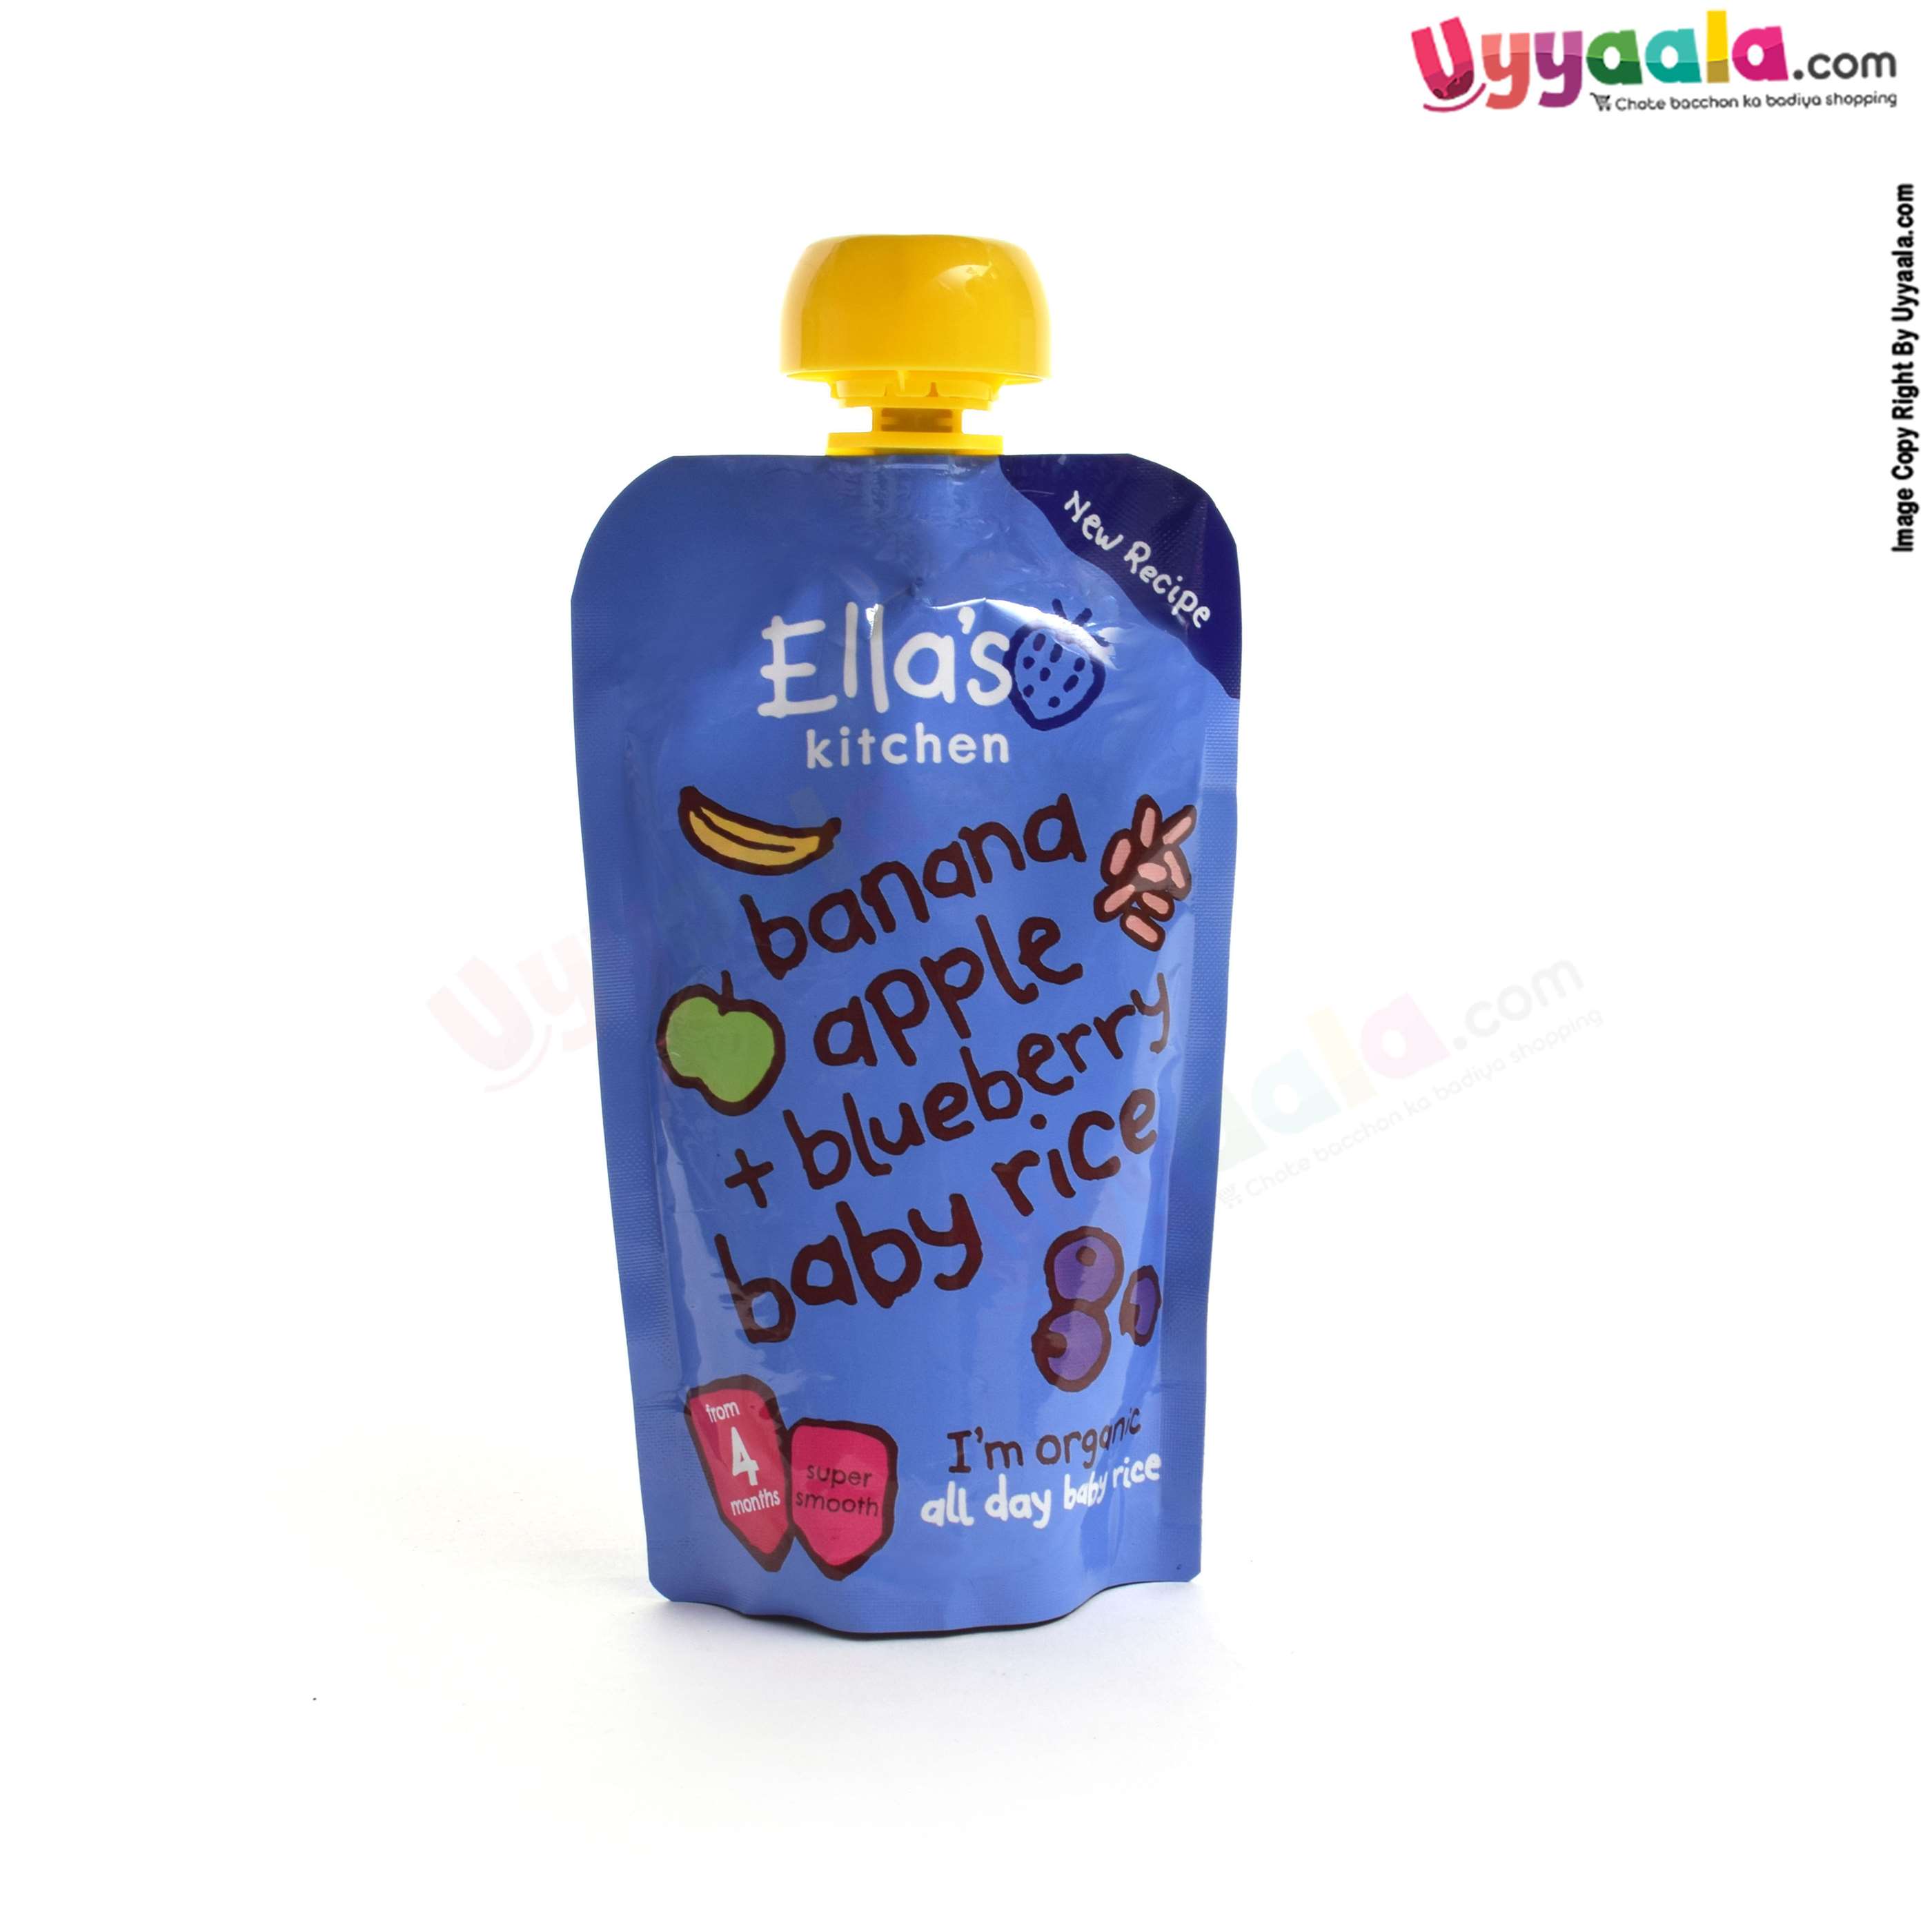 ELLA'S KITCHEN Banana apple + blueberry baby rice, super smooth purees for babies - 120g, 4 months +